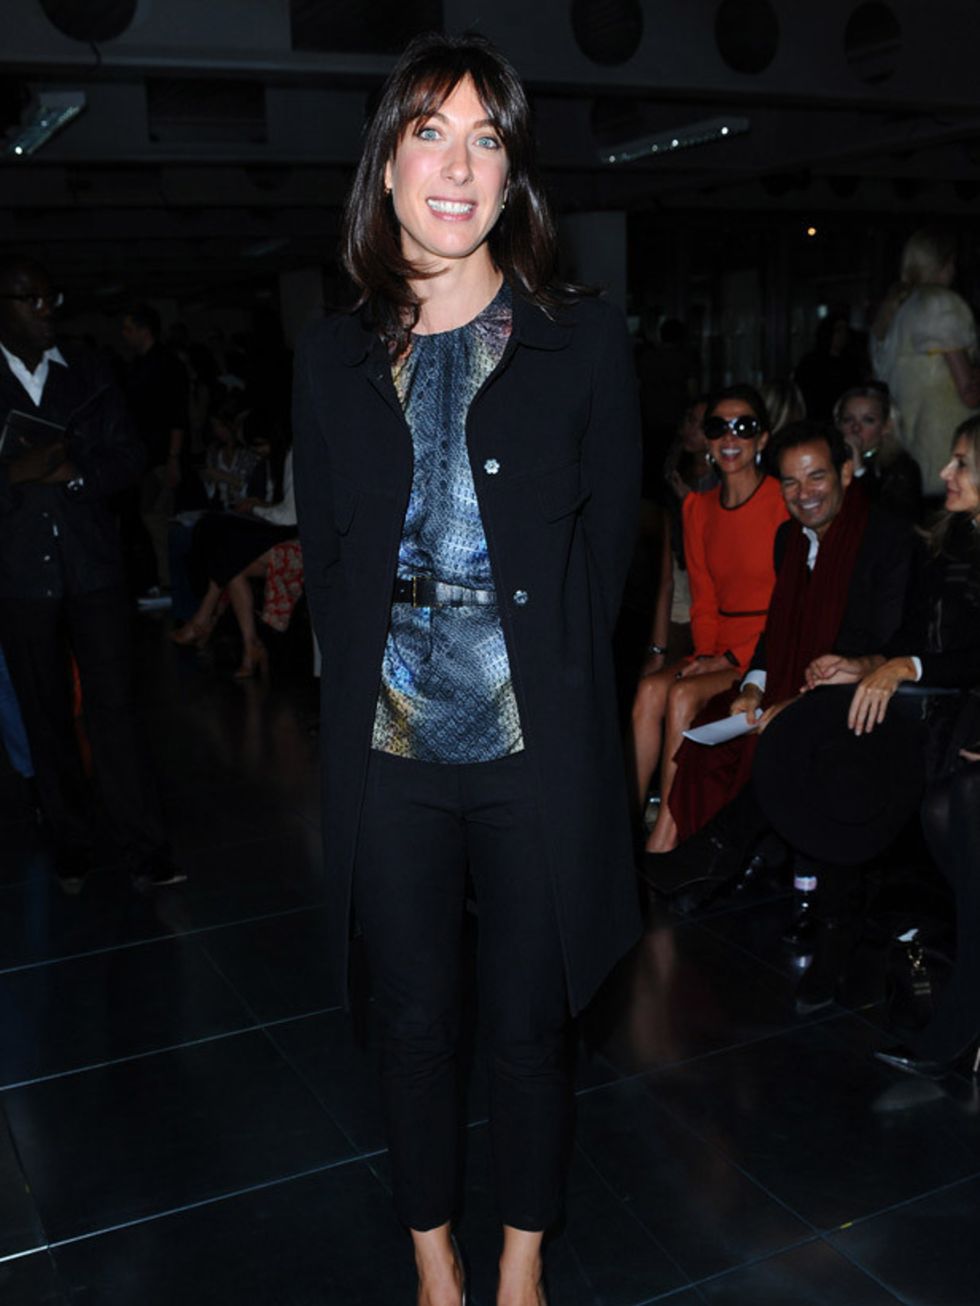 <p>Samantha Cameron at London Fashion Week Spring/Summer 2012 the Christopher Kane show is wearing a <a href="http://origin.elleuk.com/catwalk/collections/peter-pilotto/">Peter Pilotto</a> blouse, September 2011.</p>